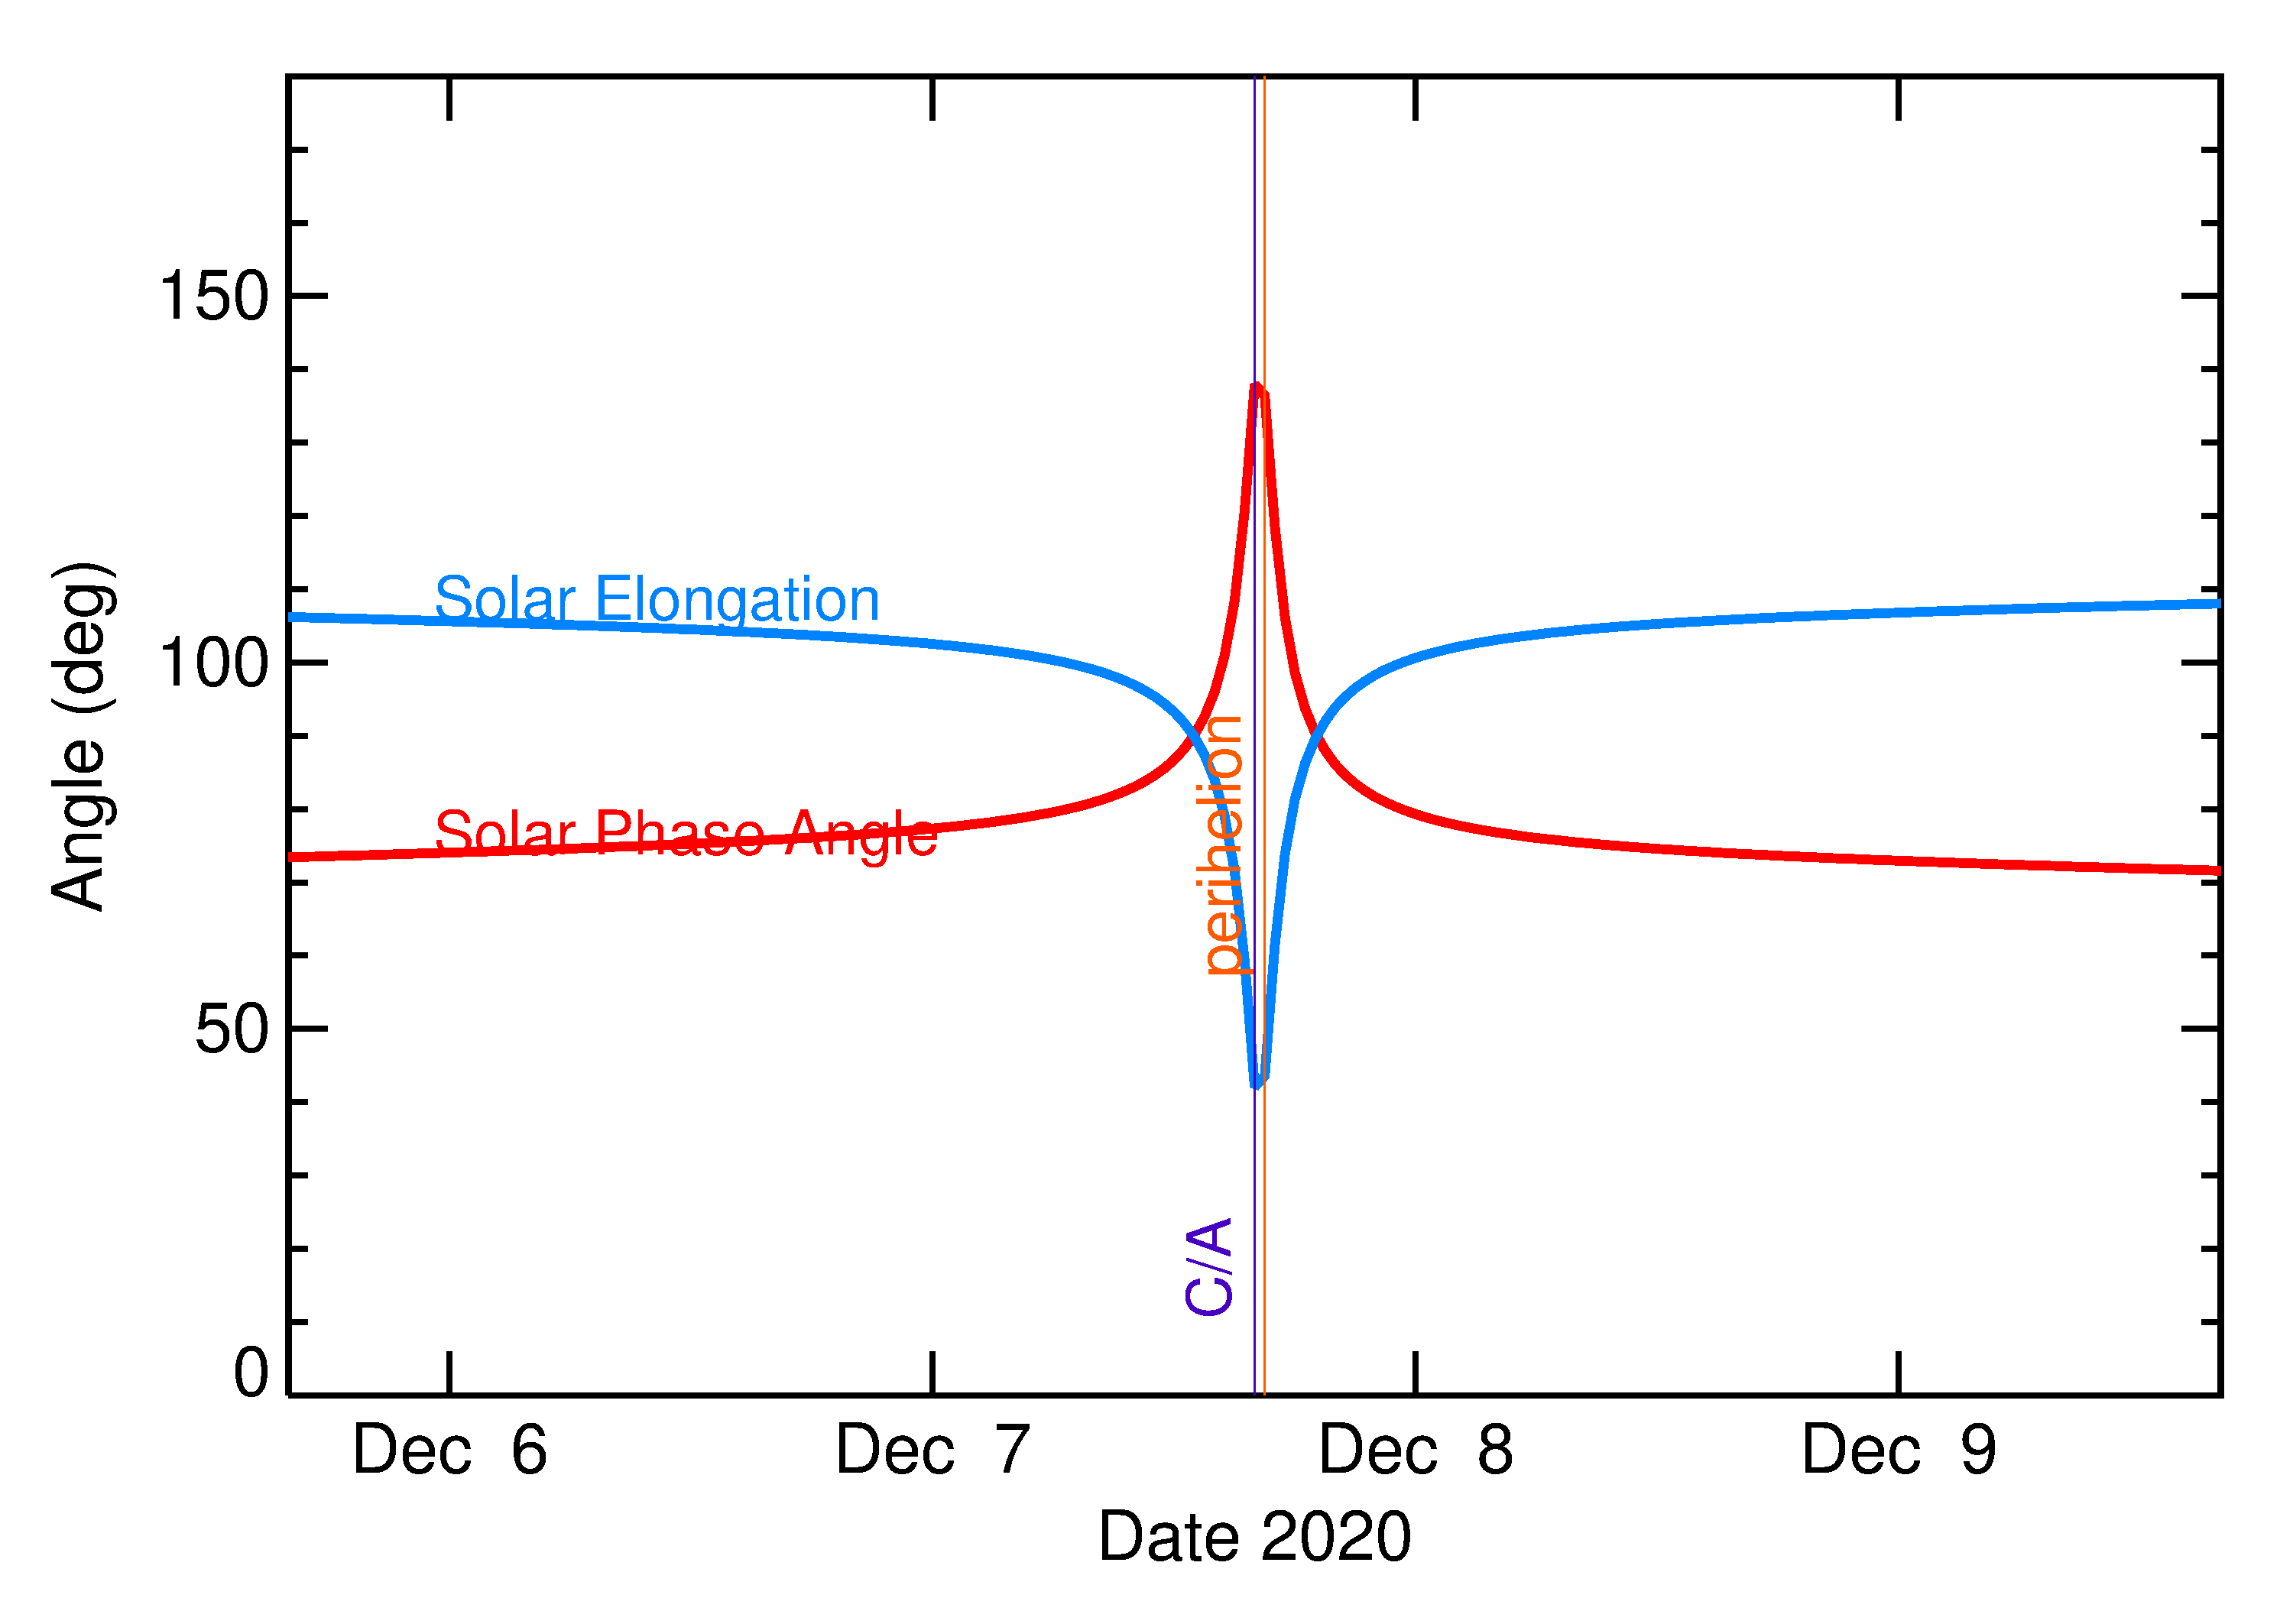 Solar Elongation and Solar Phase Angle of 2020 XK1 in the days around closest approach